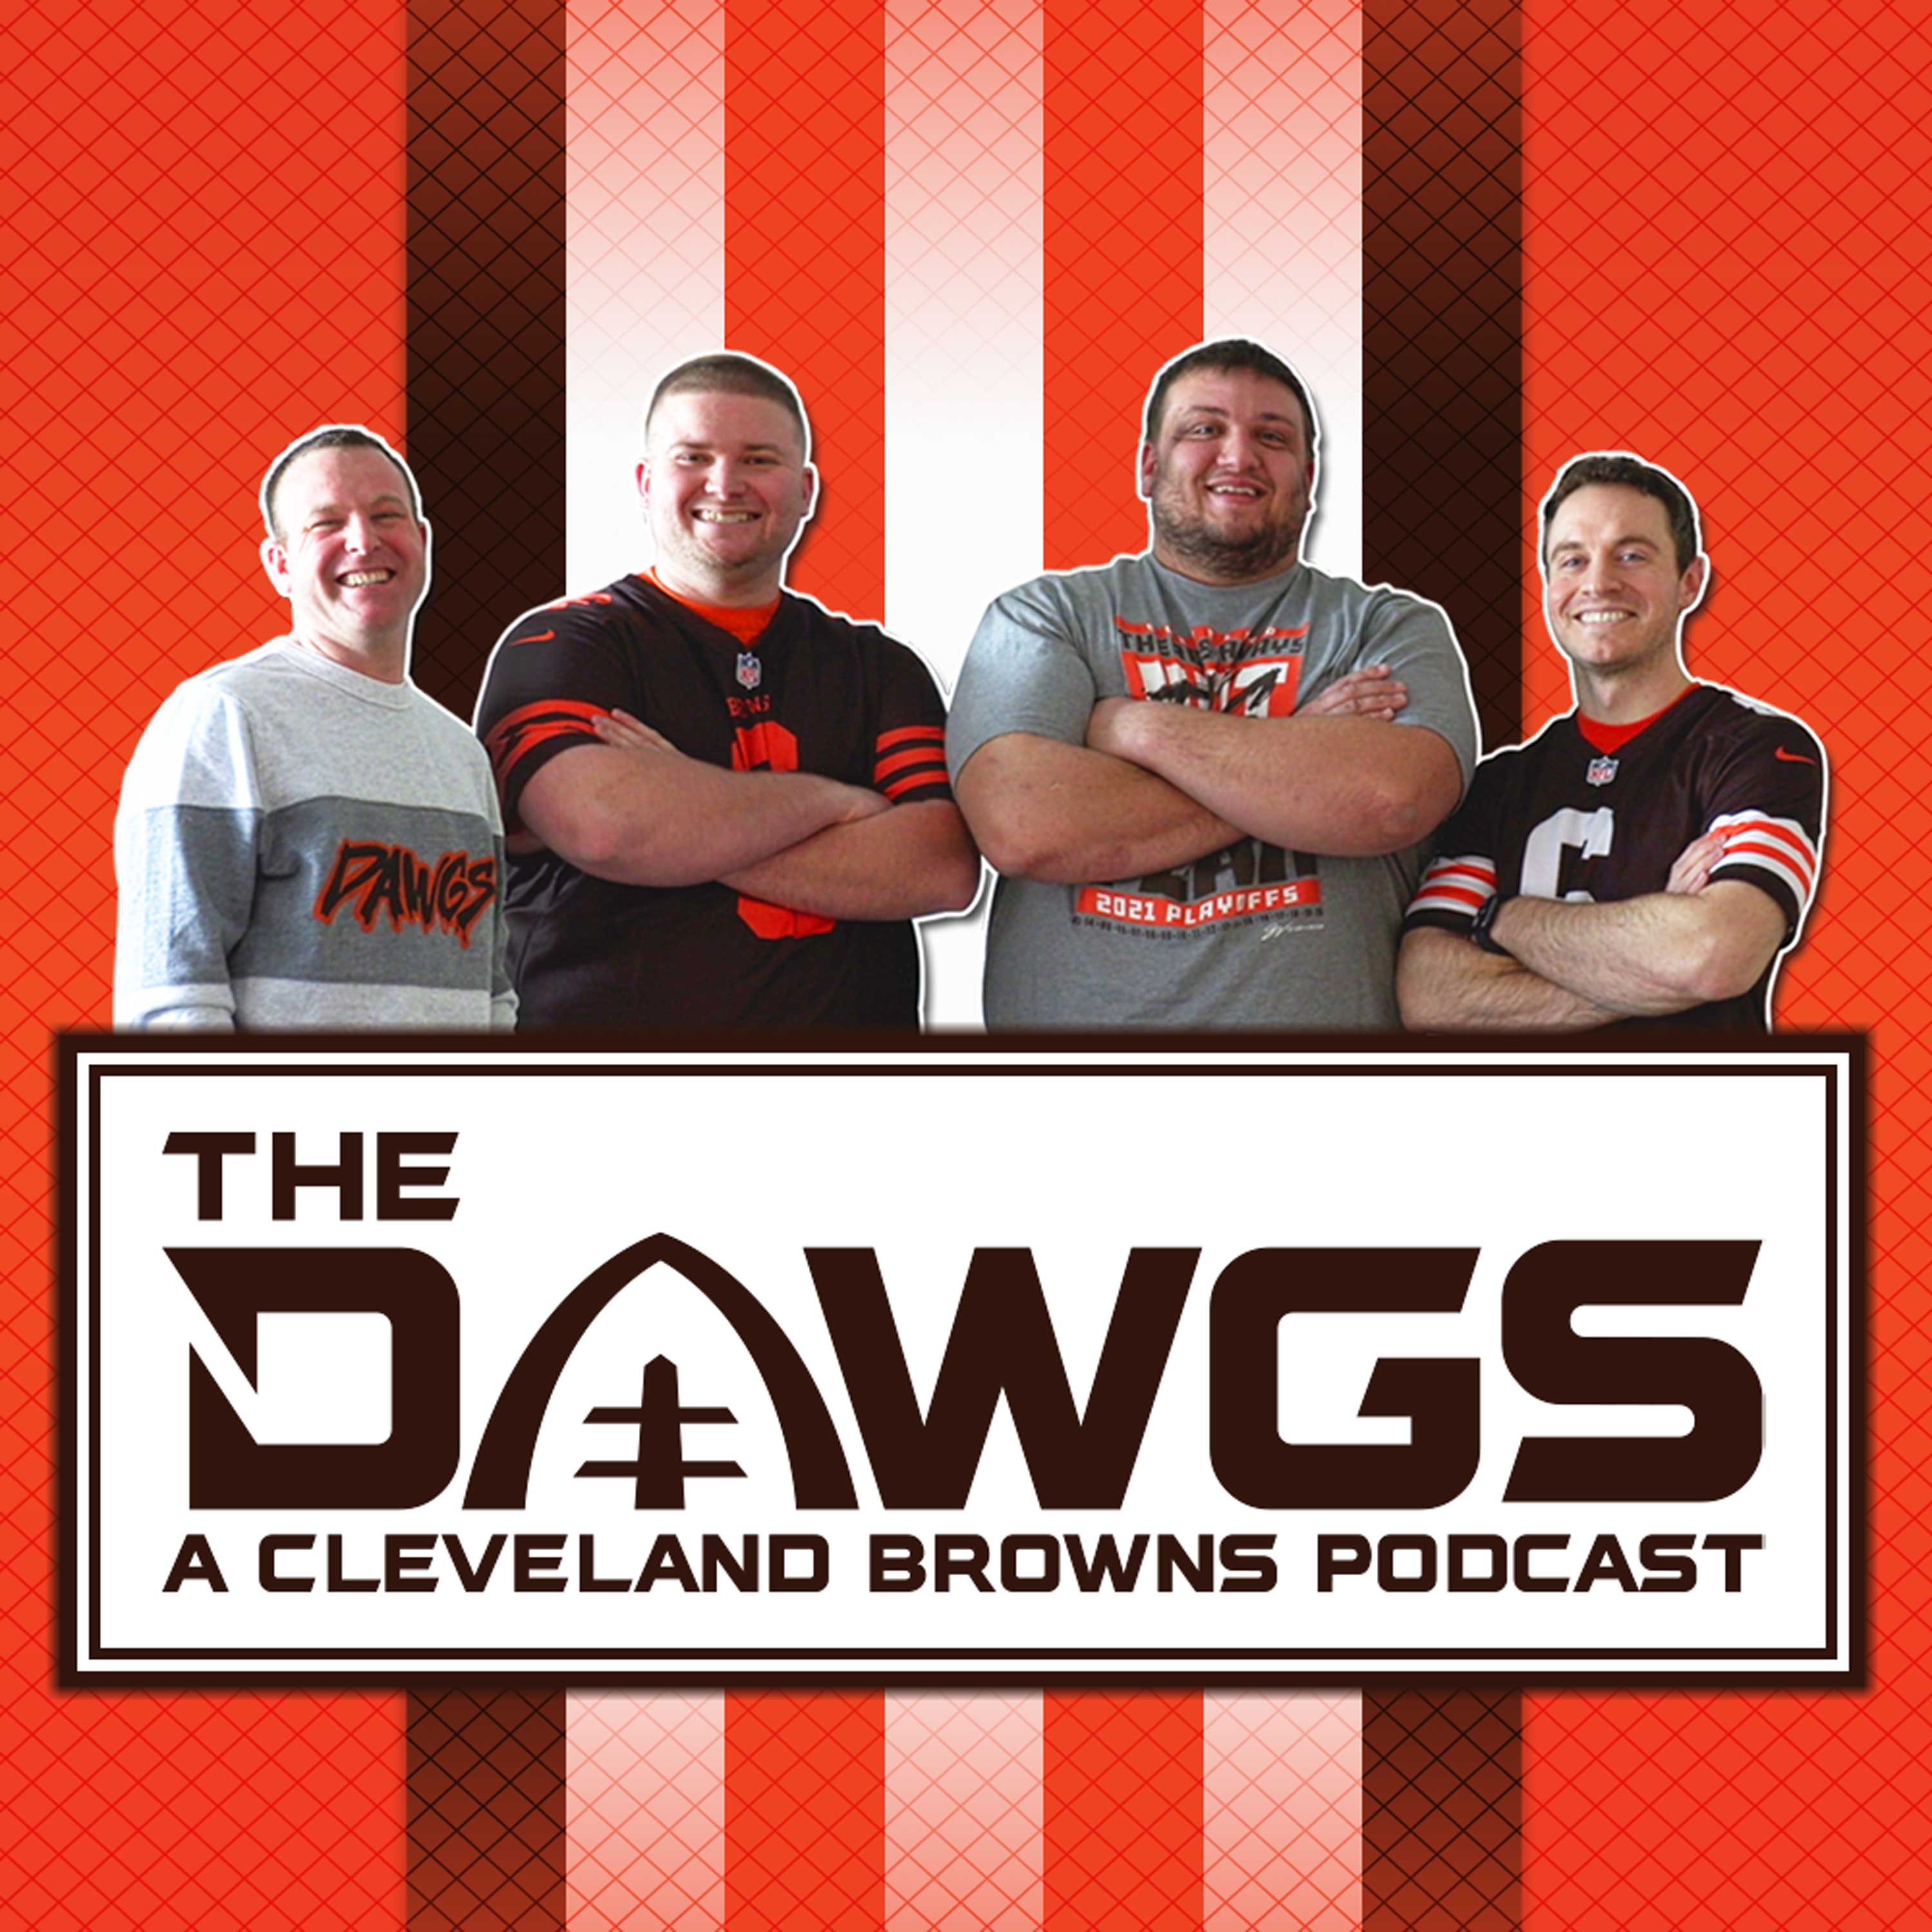 Jarvis Landry’s Tweets + The Most Intriguing Free Agents of 2022 | The Dawgs - A Cleveland Browns Podcast - February 23, 2022